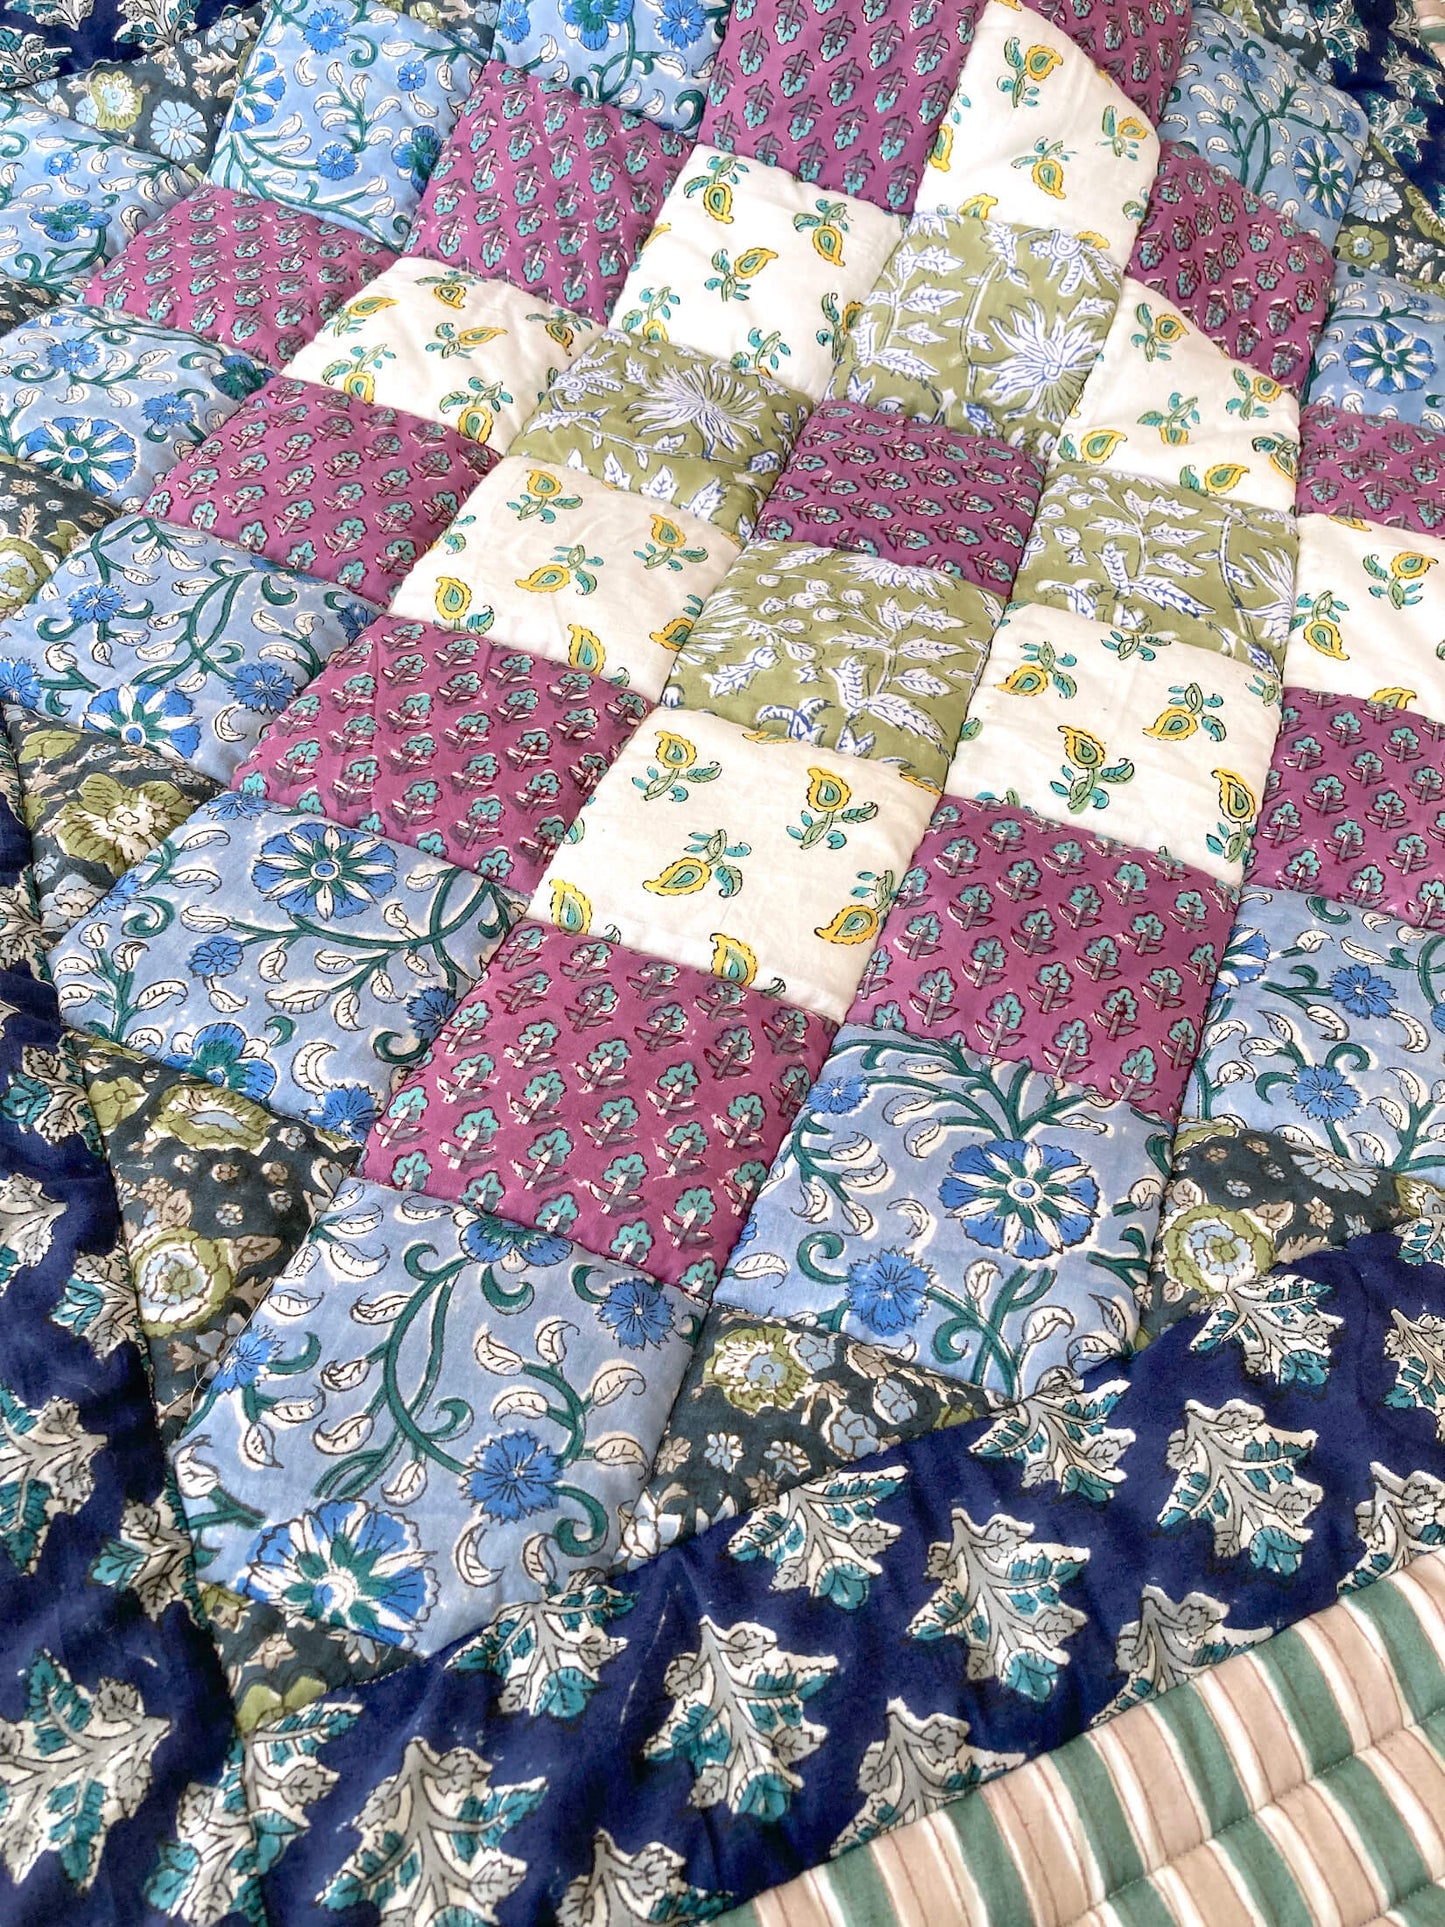 Hand Block Print Patchwork Small Quilt #189-A